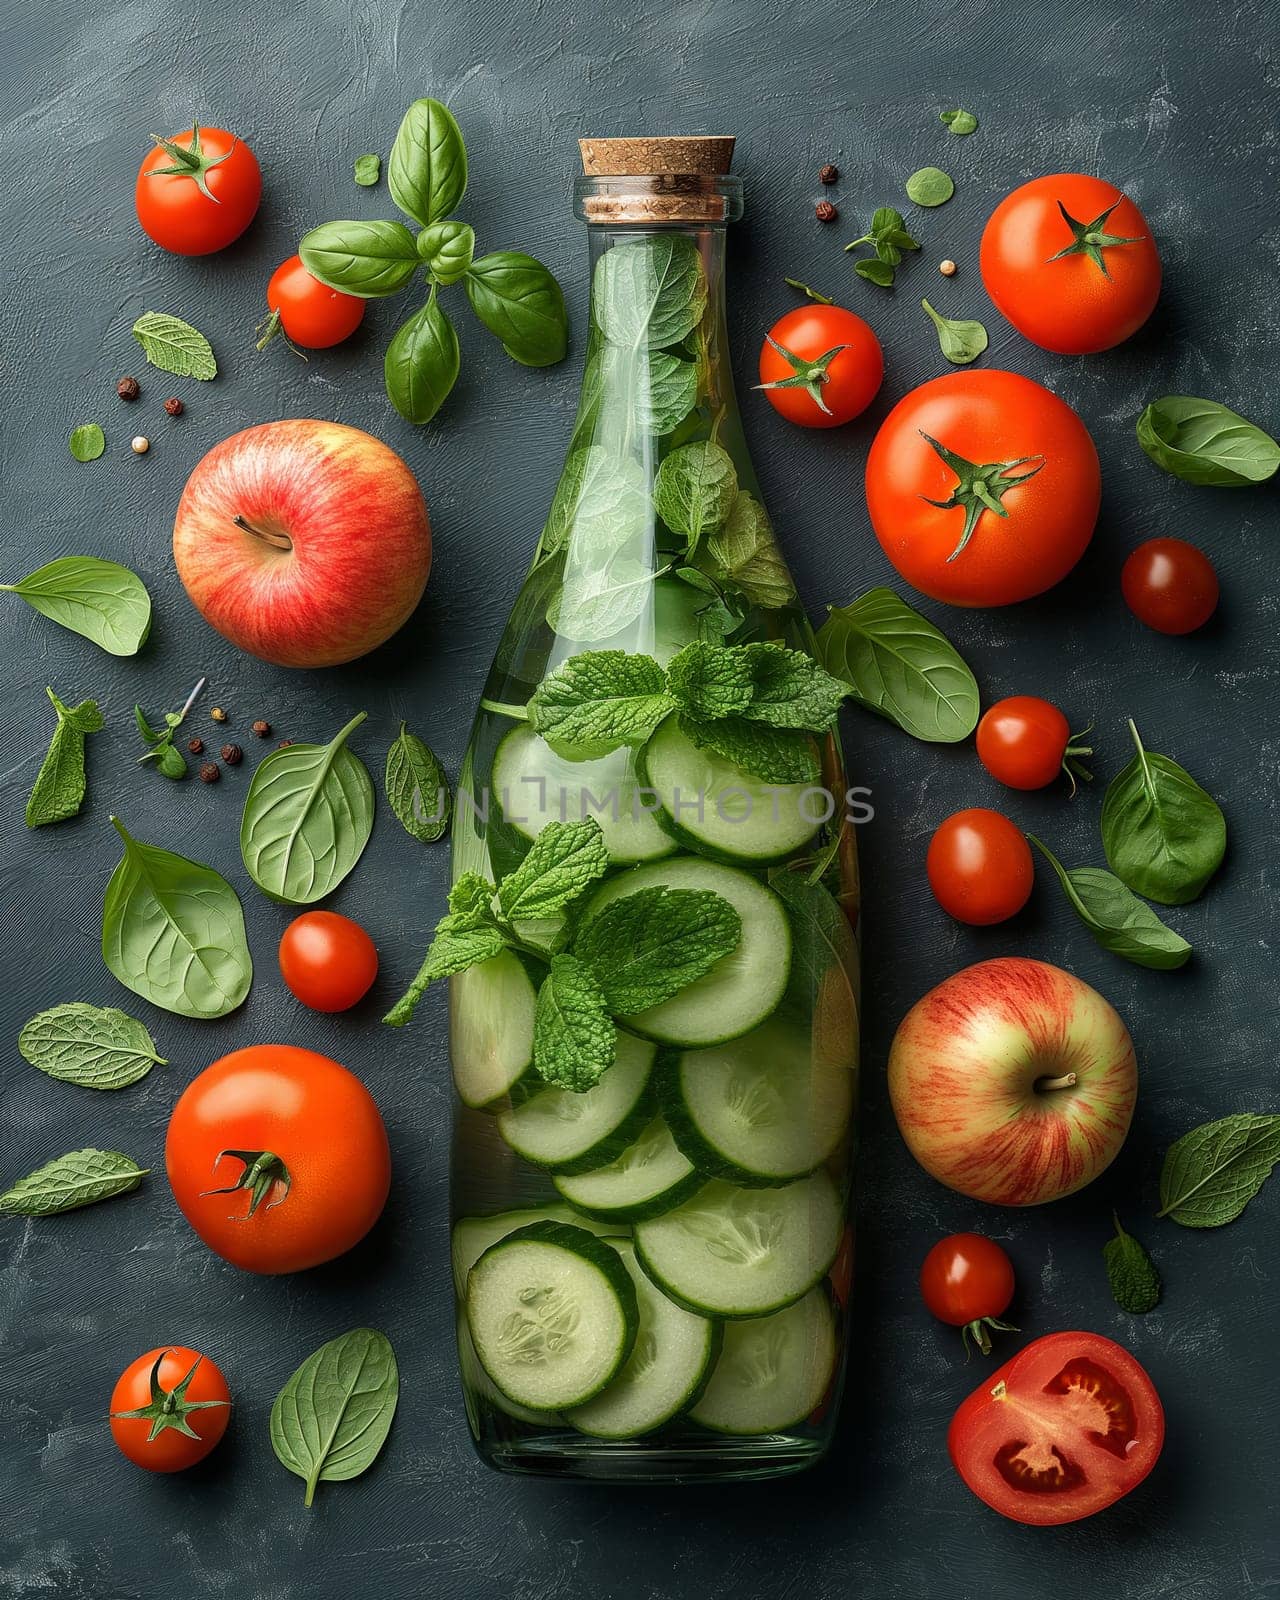 Glass Bottle With Cucumbers and Tomatoes. by Fischeron